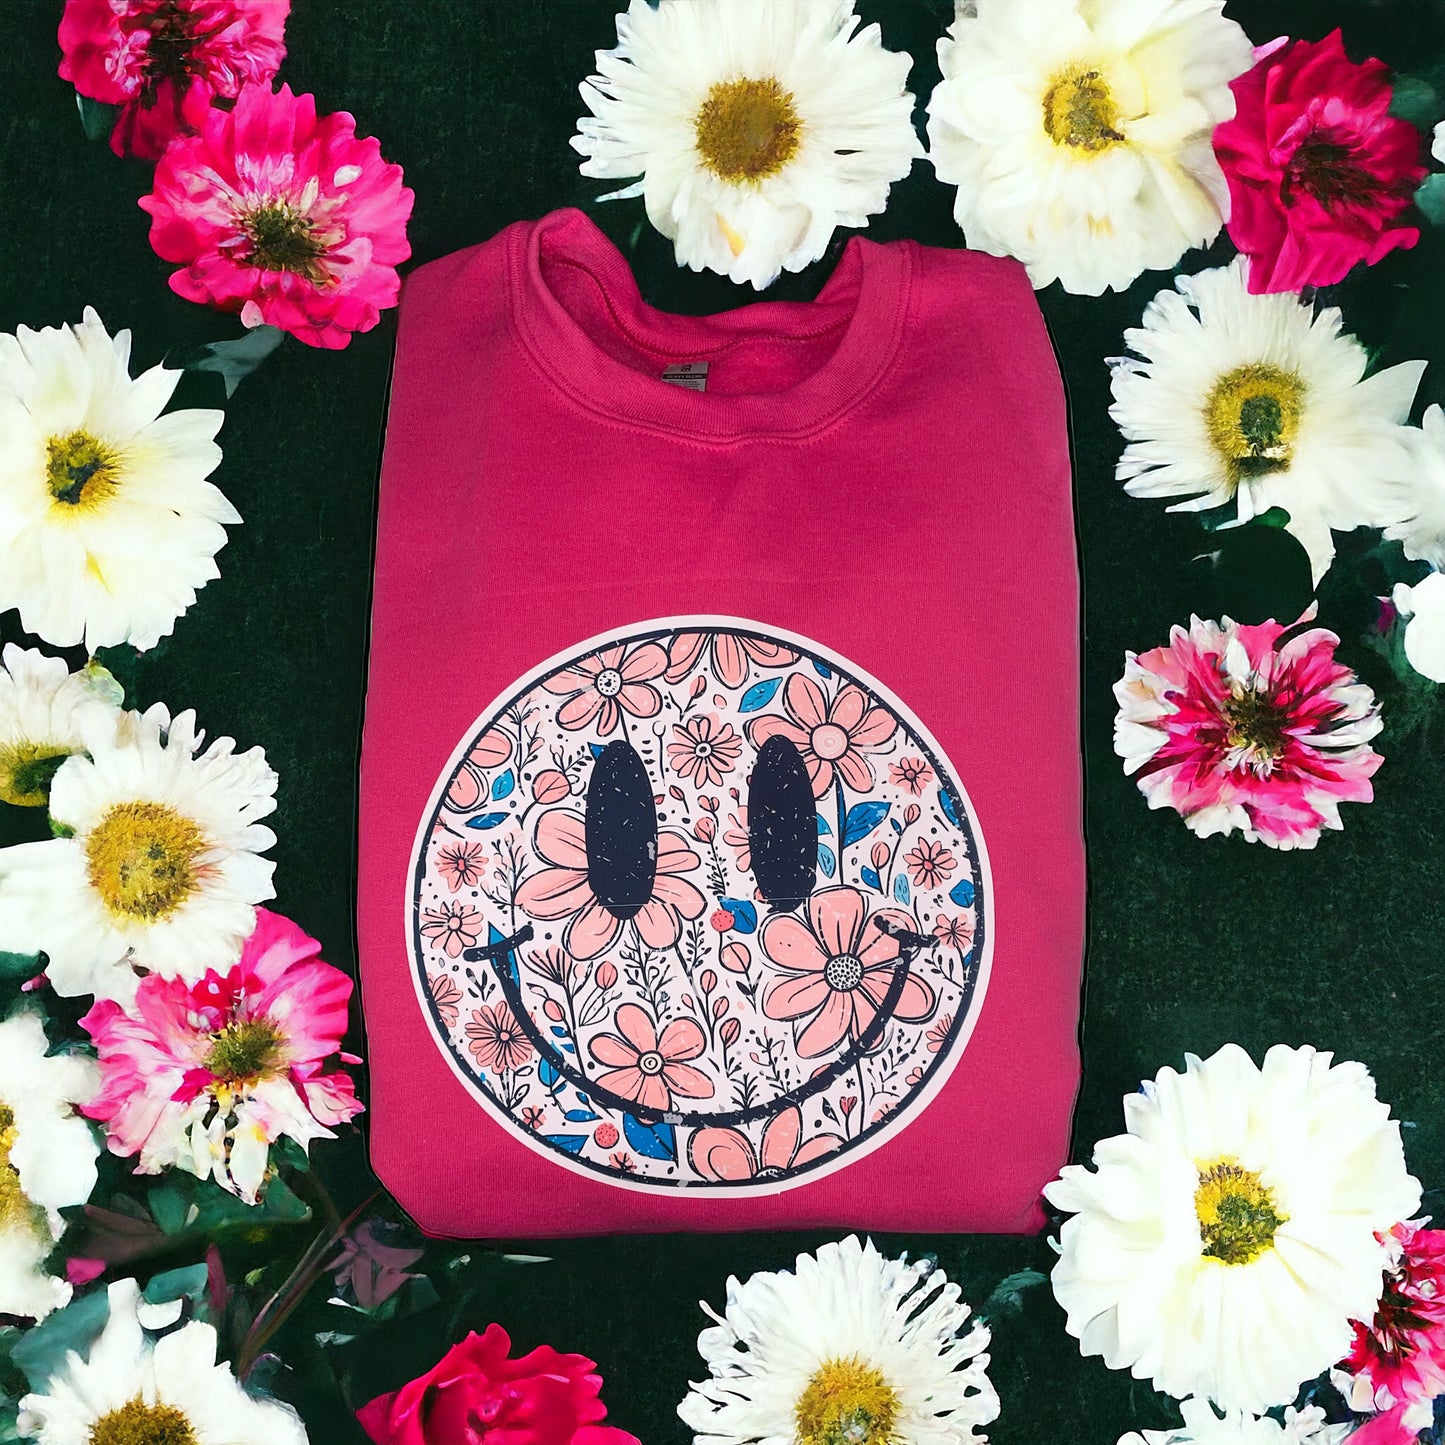 Floral Smiley Face One Of A Kind Handmade Printed Sweatshirt - Heather's Heavenly Boutique